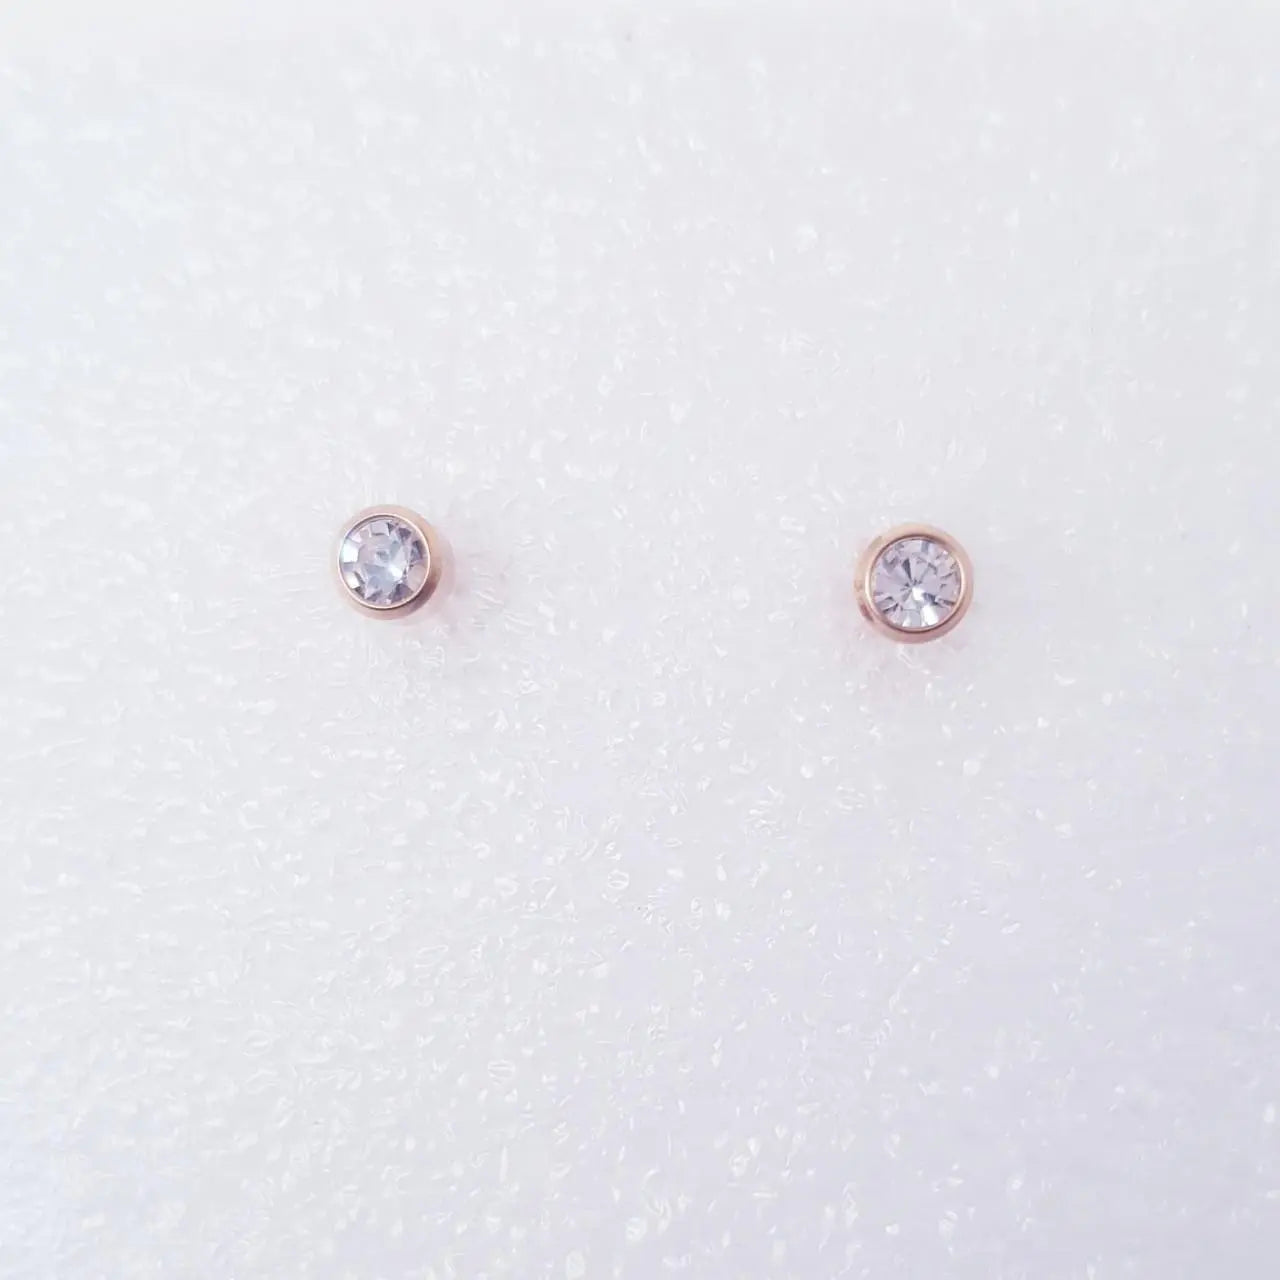 Surgical Piercing Stud